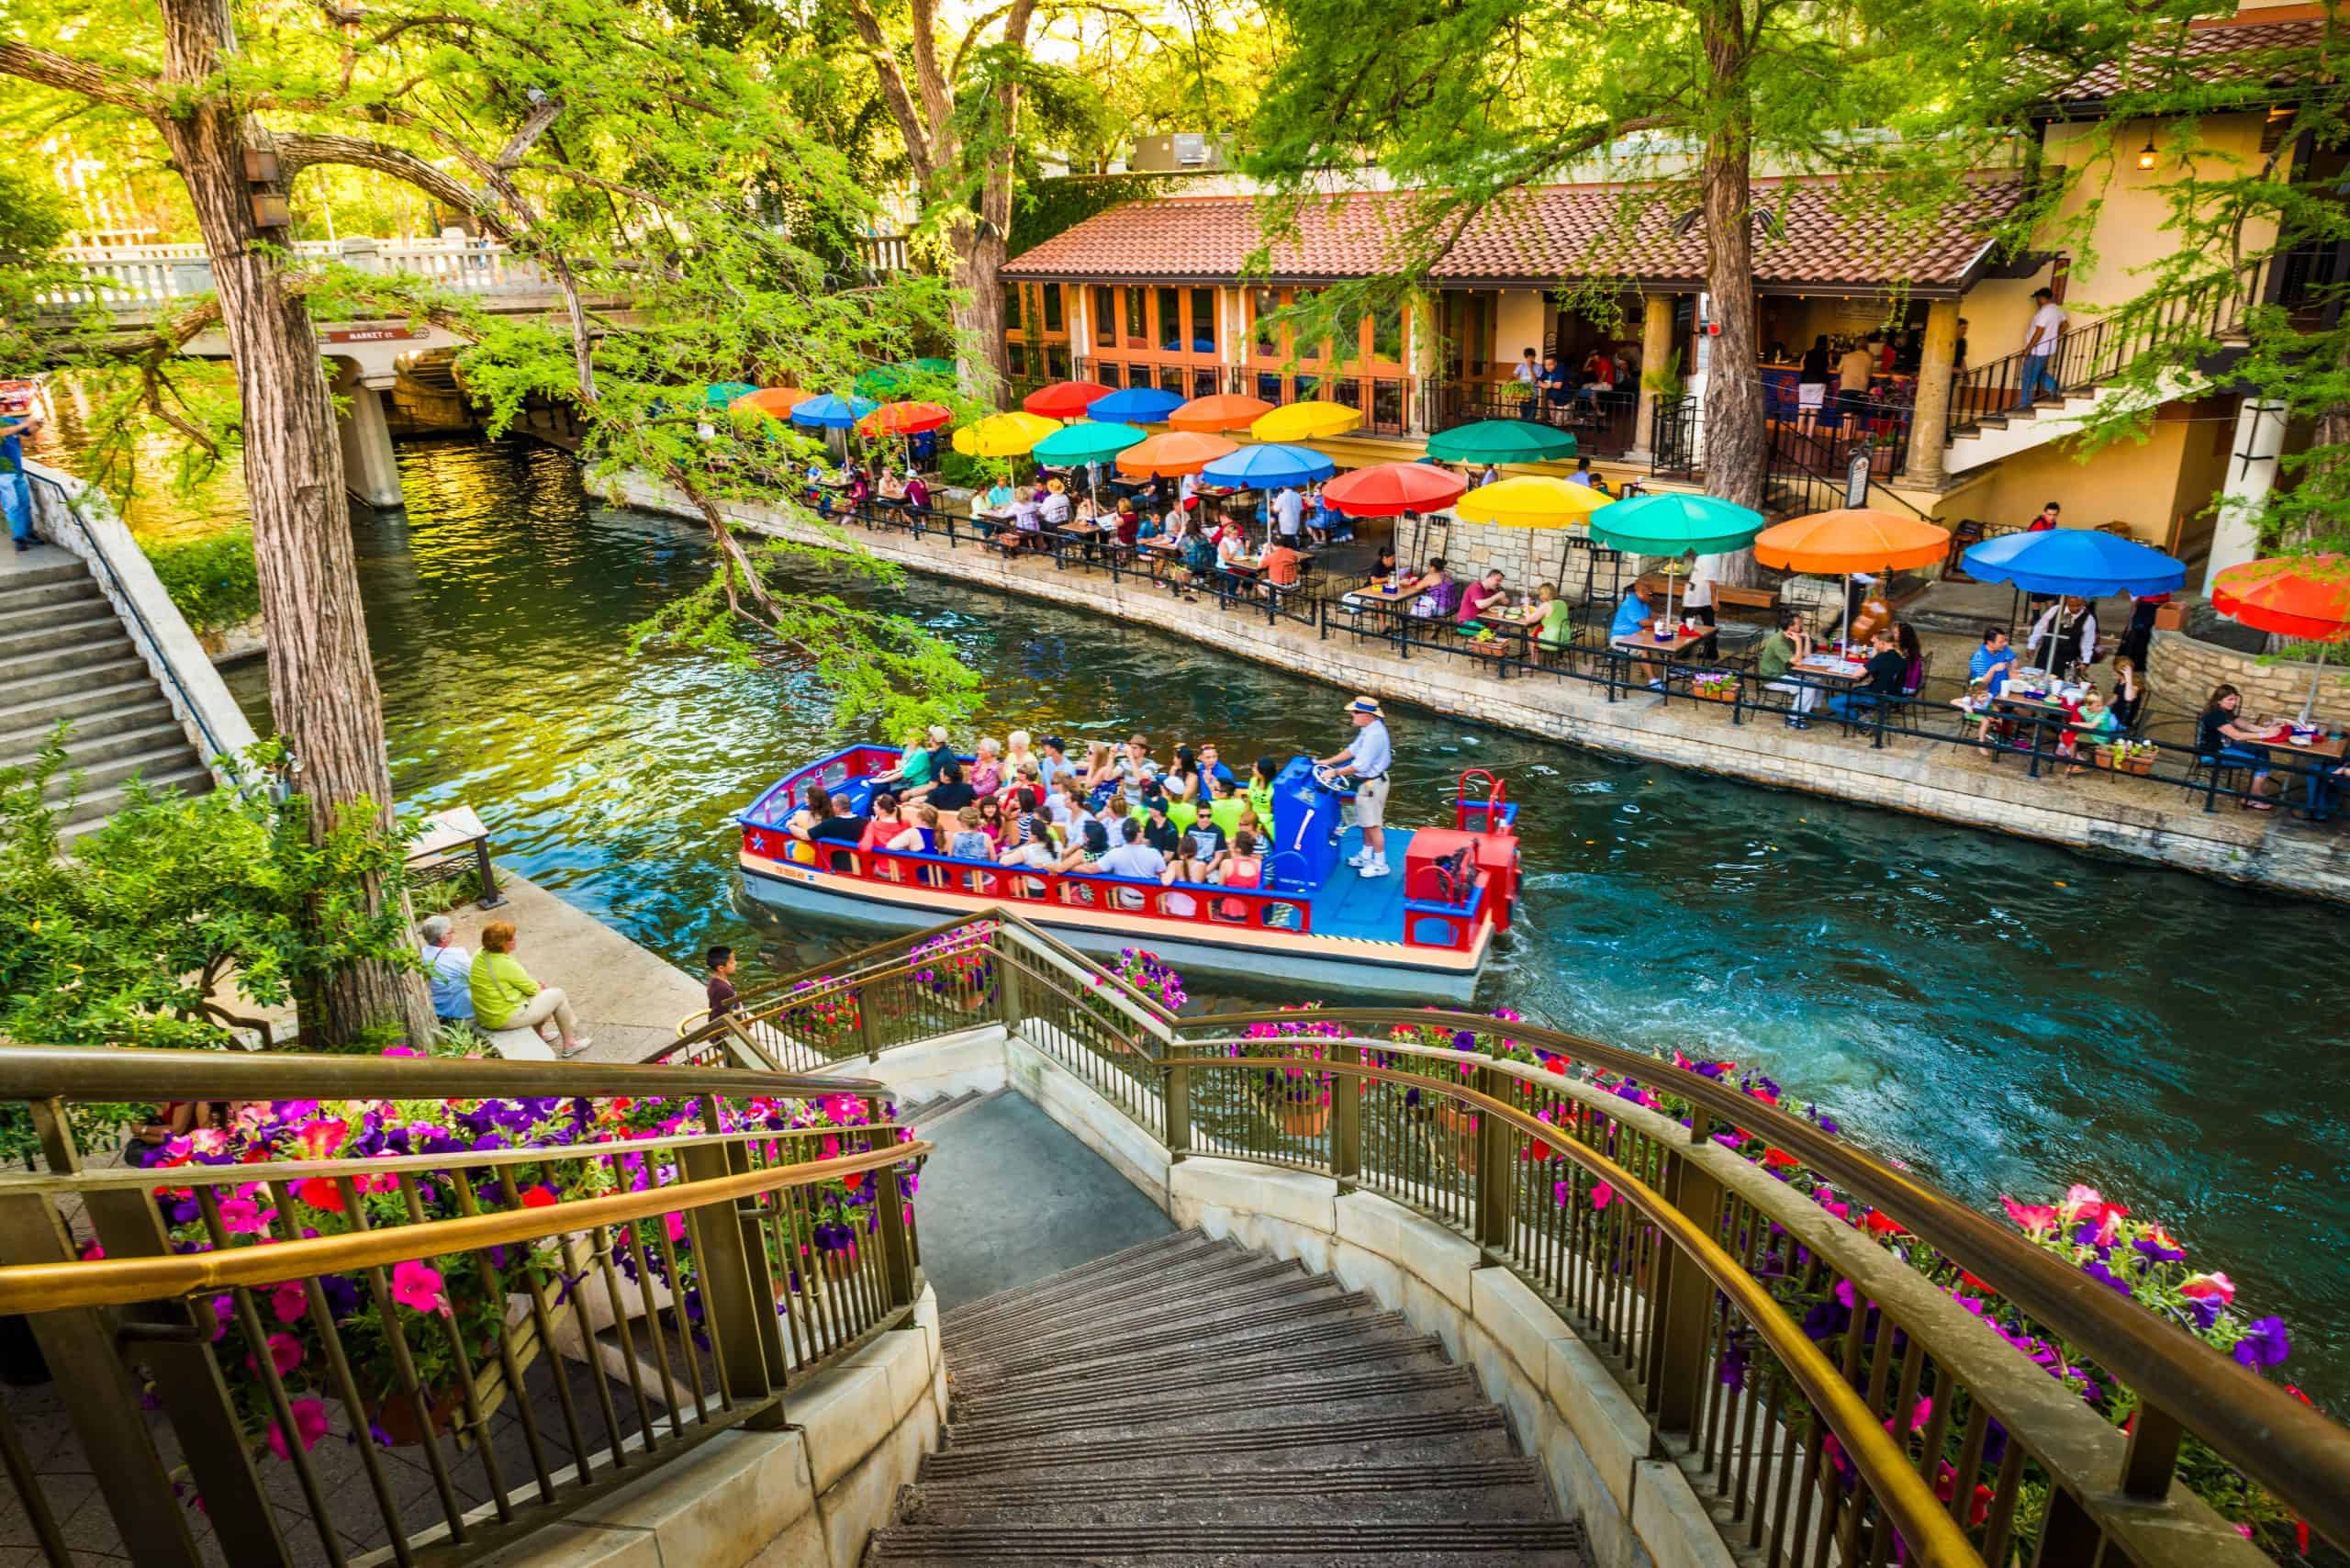 places to visit in san antonio with family